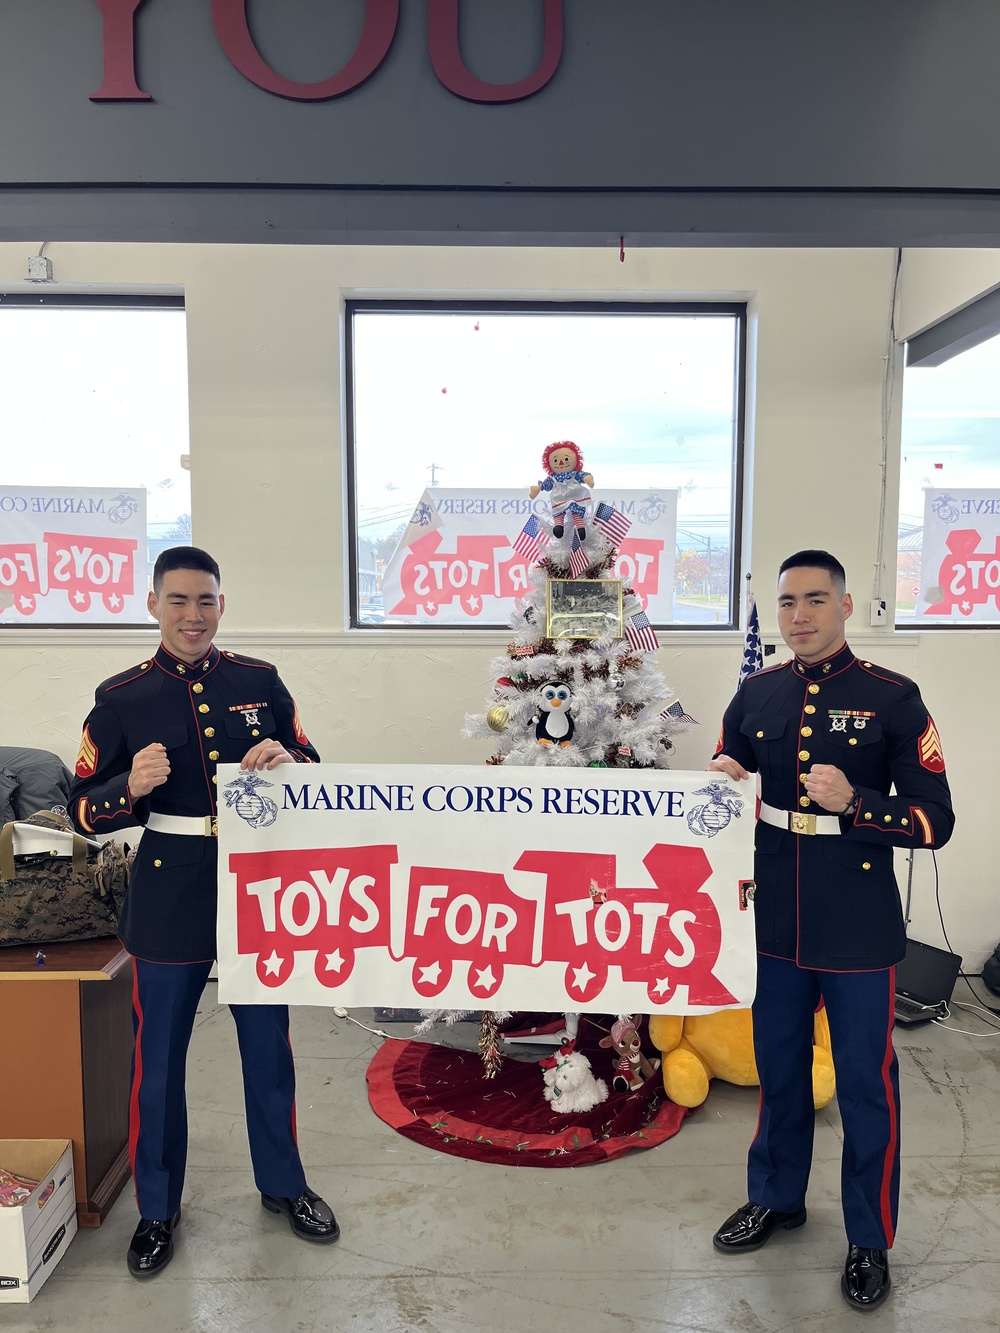 U.S. Marine Corps brothers participate in Toys For Tots